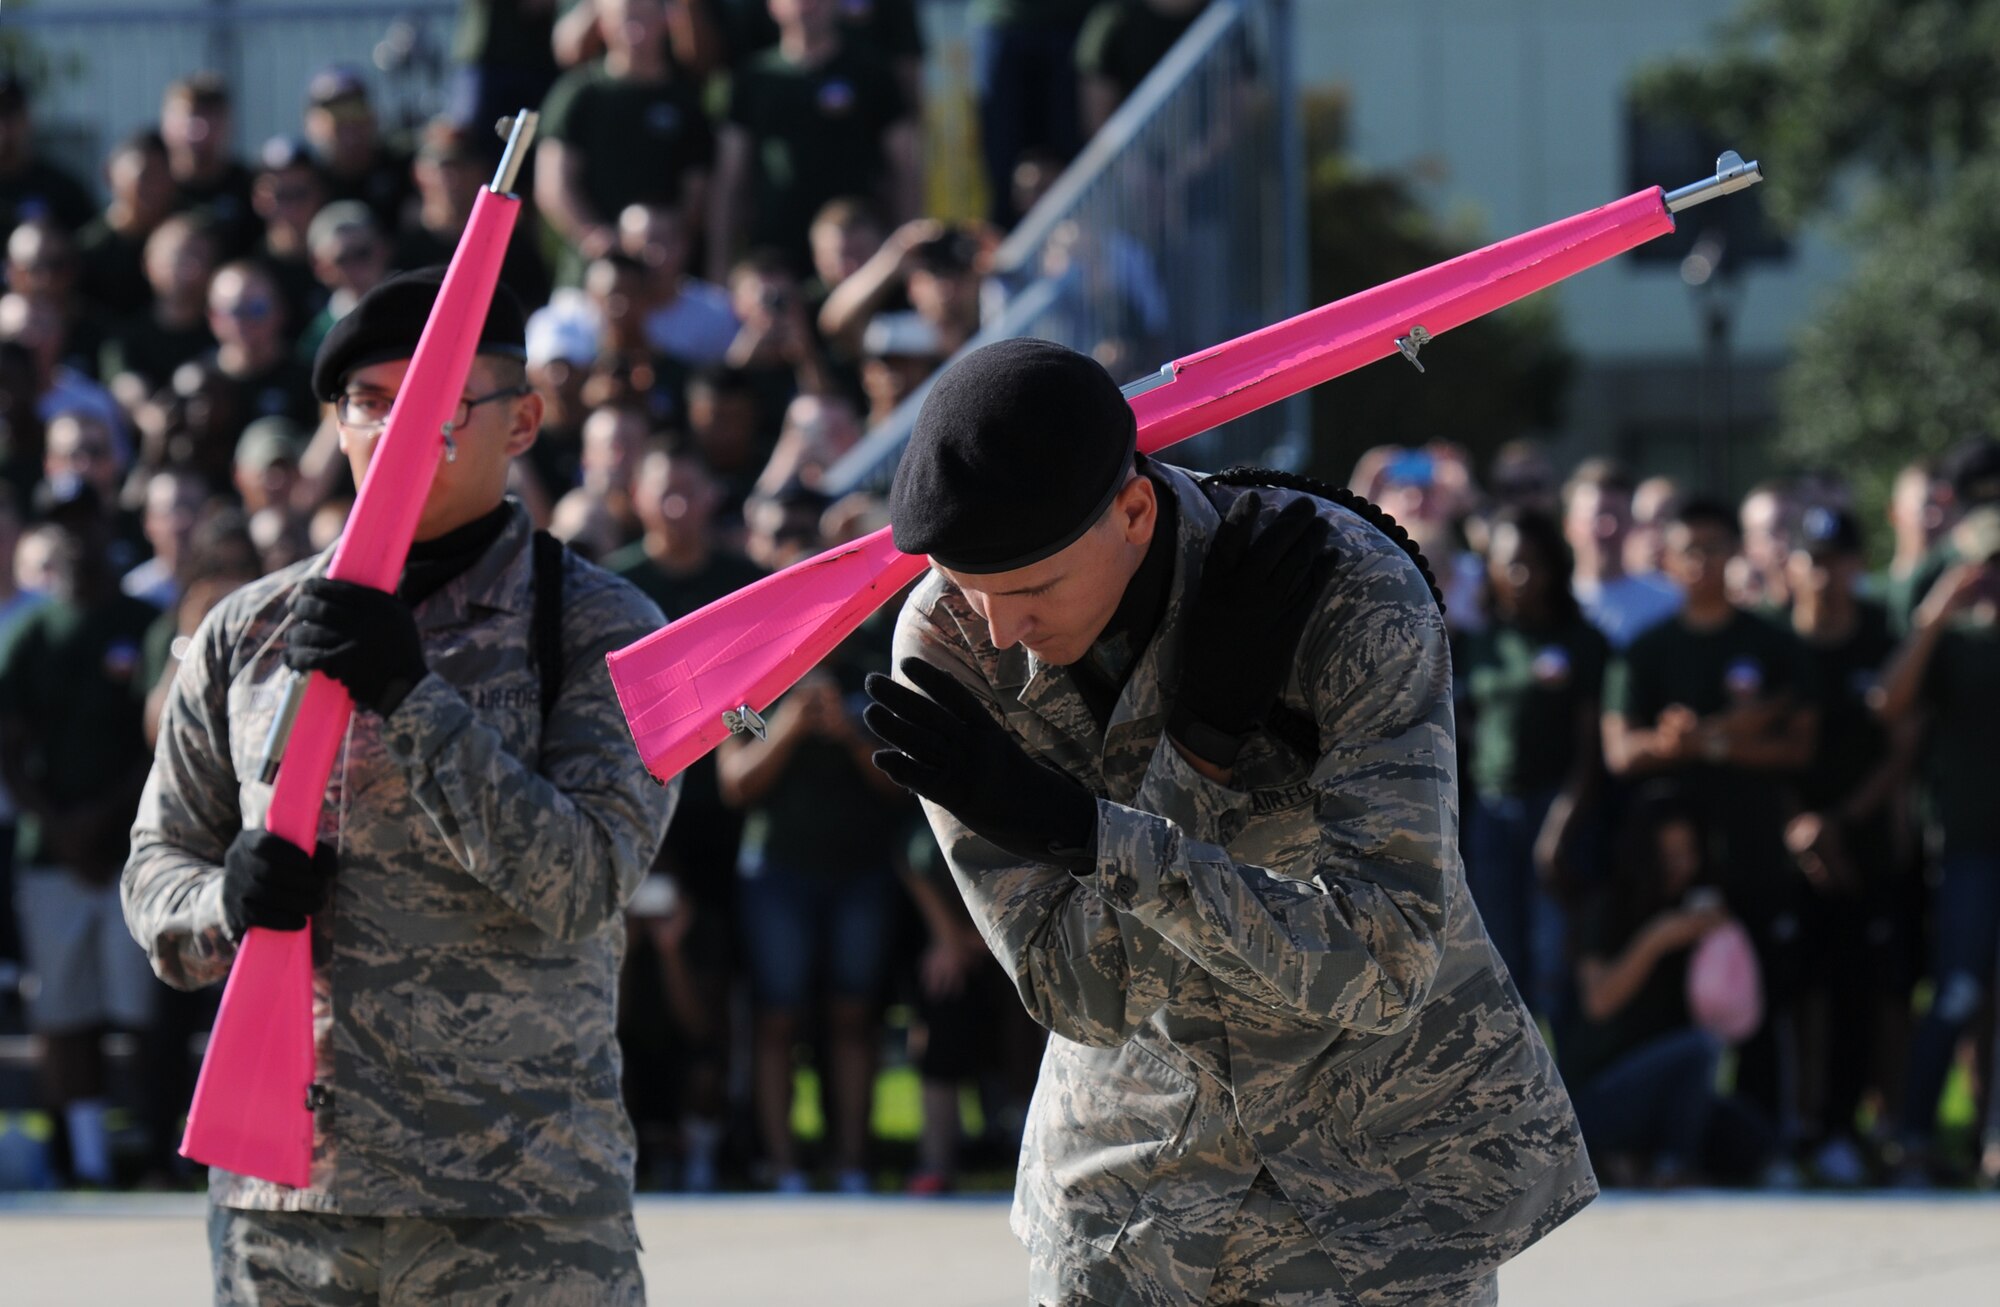 Airman 1st Class Kaleb Rios and Airman Basic Morgan Mayhew, 334th Training Squadron freestyle drill team members, perform during the 81st Training Group drill down at the Levitow Training Support Facility drill pad Sept. 9, 2016, on Keesler Air Force Base, Miss. The 334th TRS “Gators” placed first in open ranks, regulation and overall. (U.S. Air Force photo by Kemberly Groue/Released)